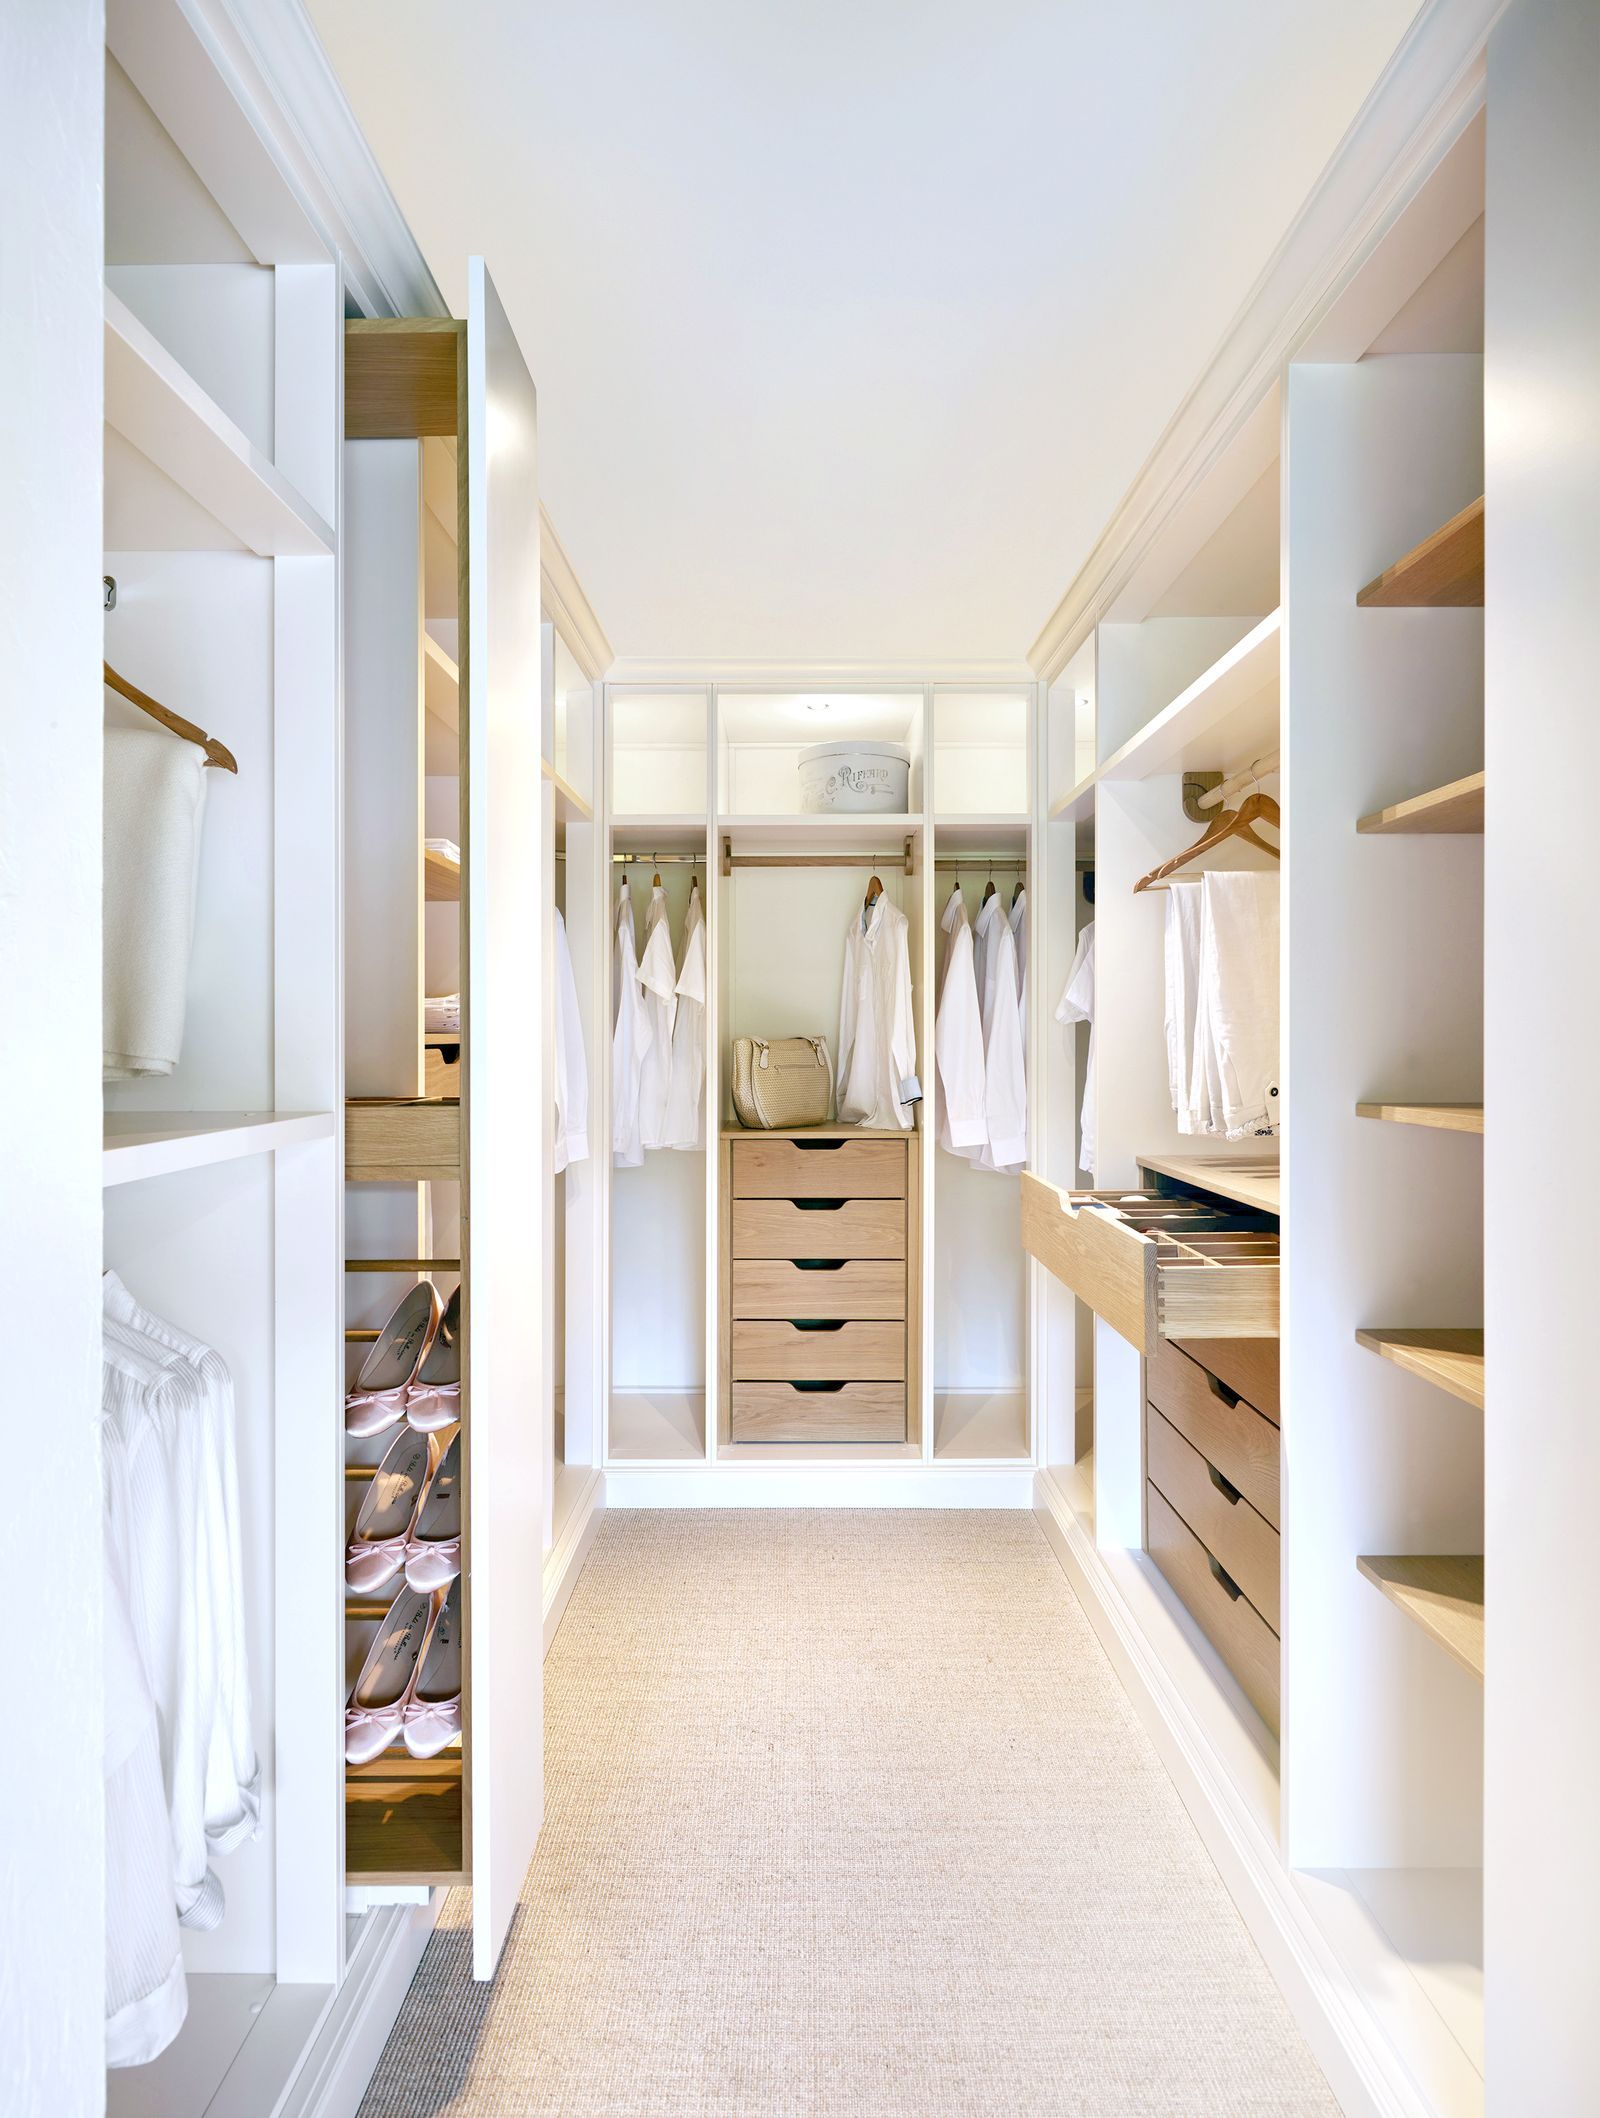 The Ultimate Storage Solution: The Luxurious Walk-in Closet